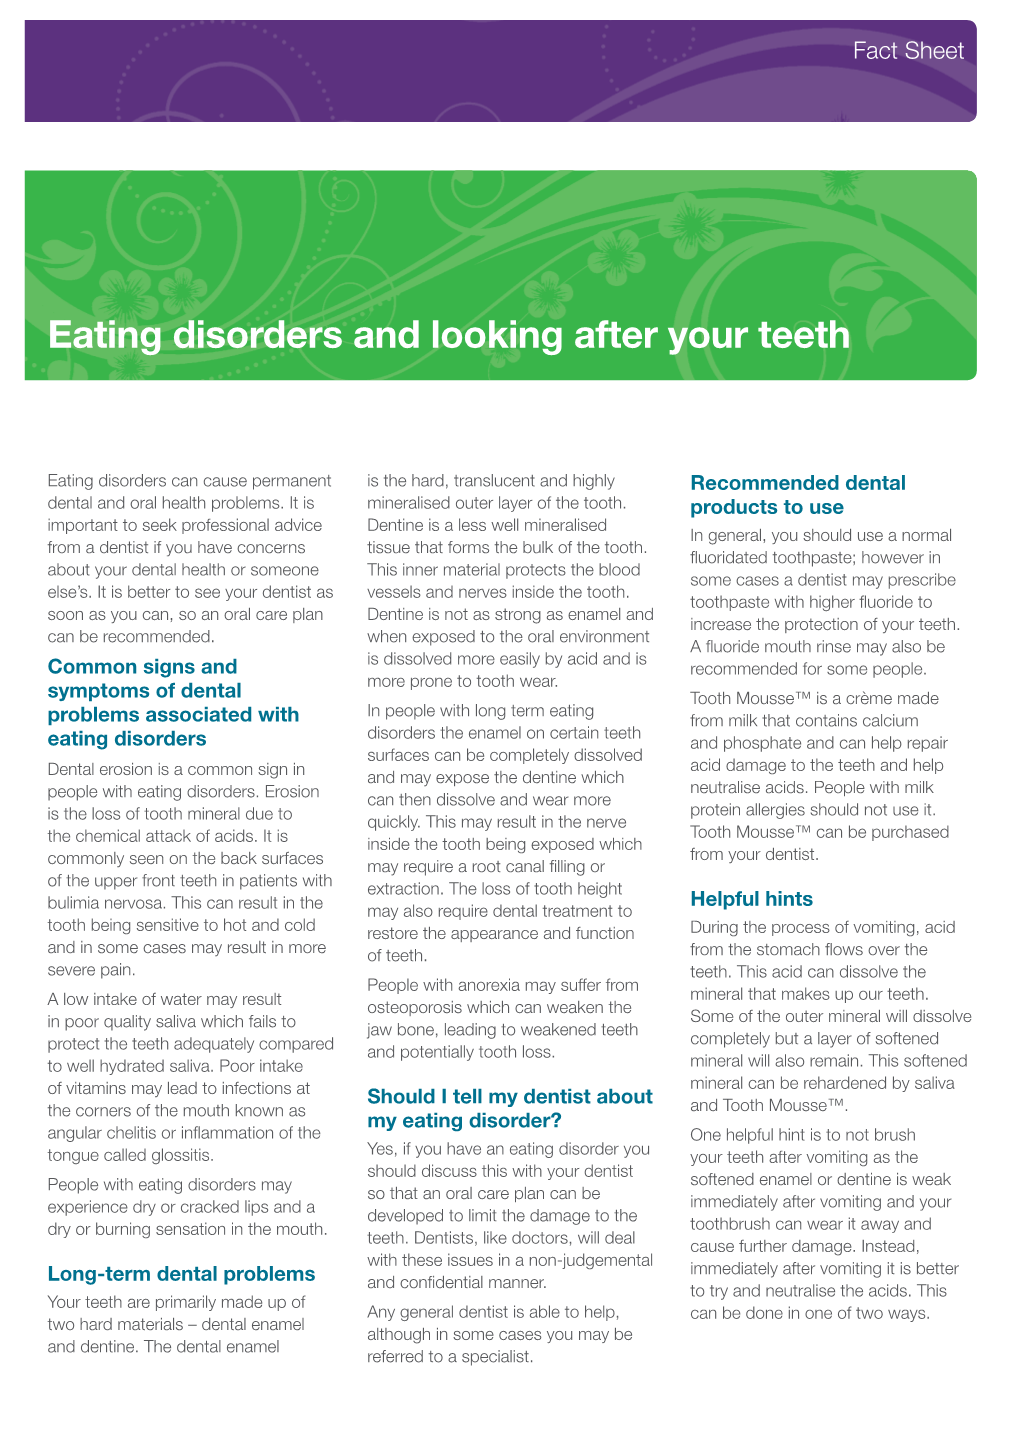 Eating Disorders and Looking After Your Teeth